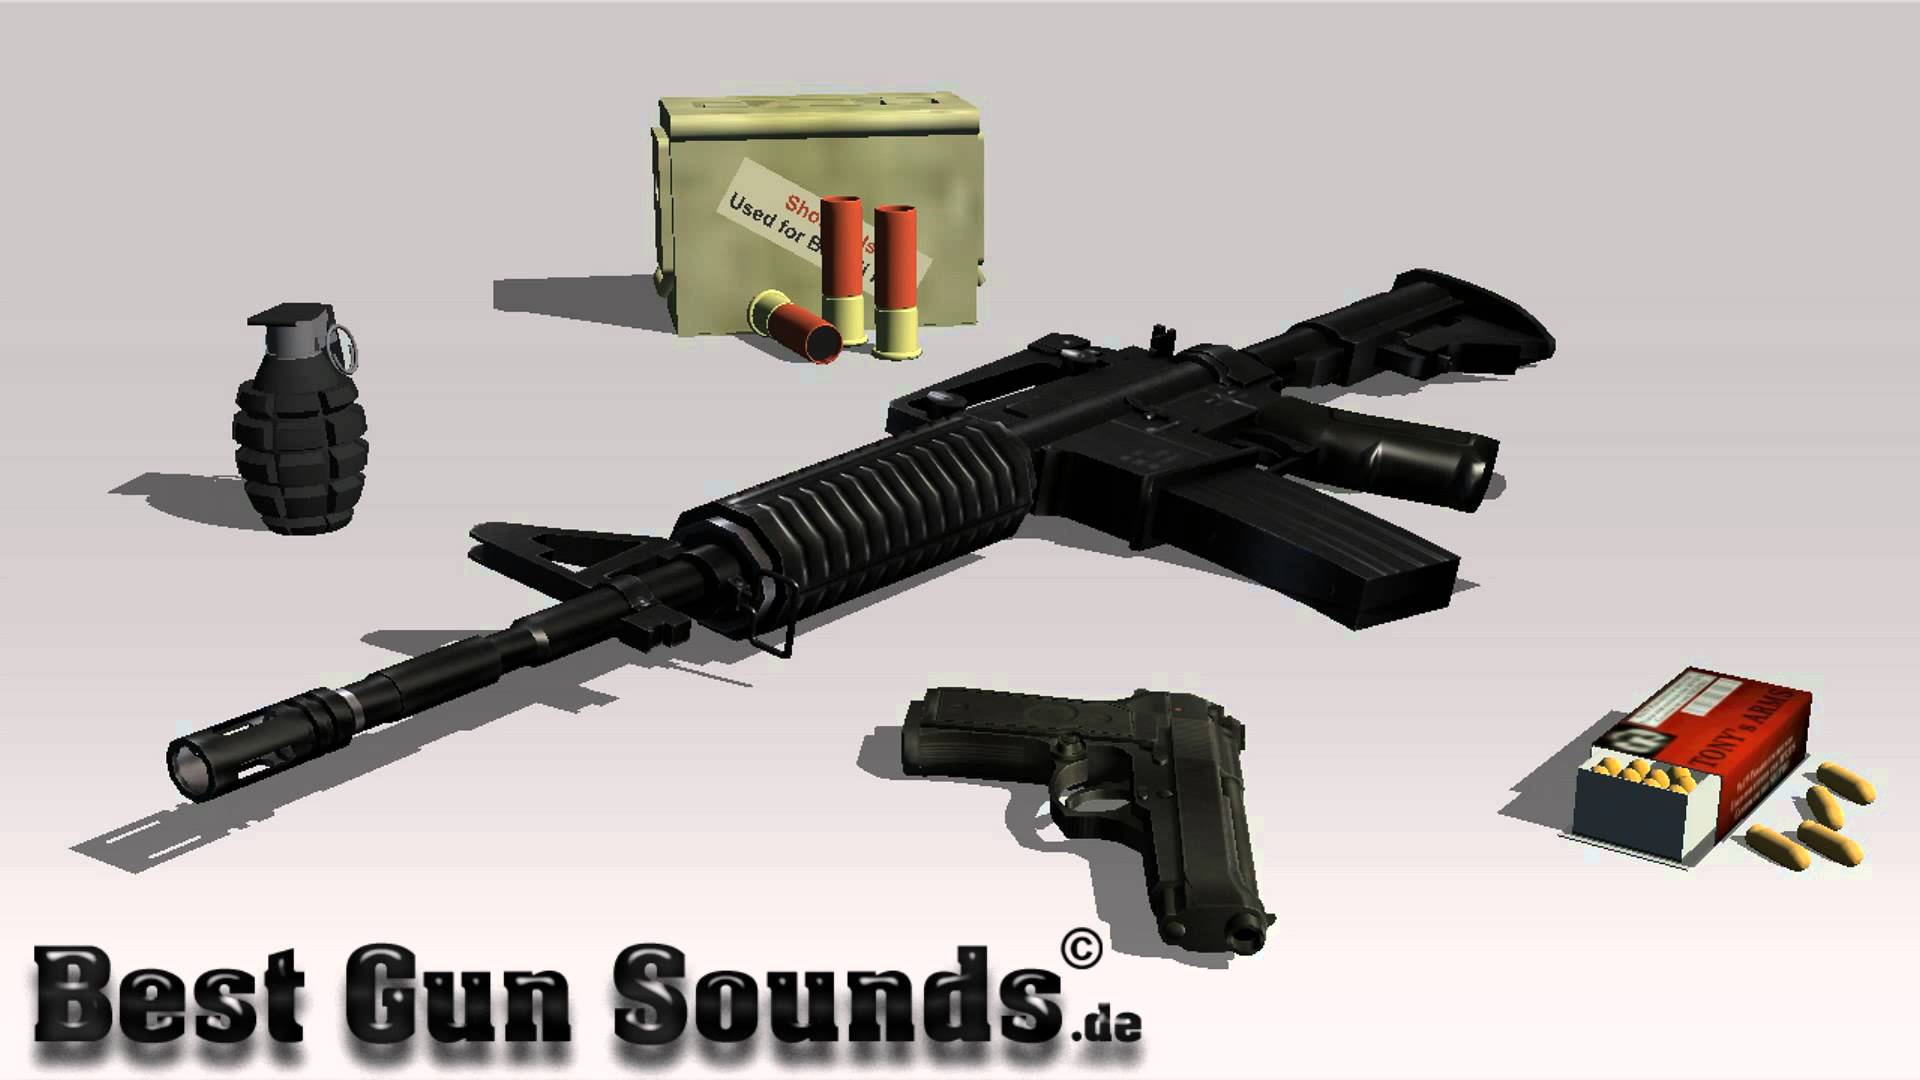 Real sound weapon gta 5